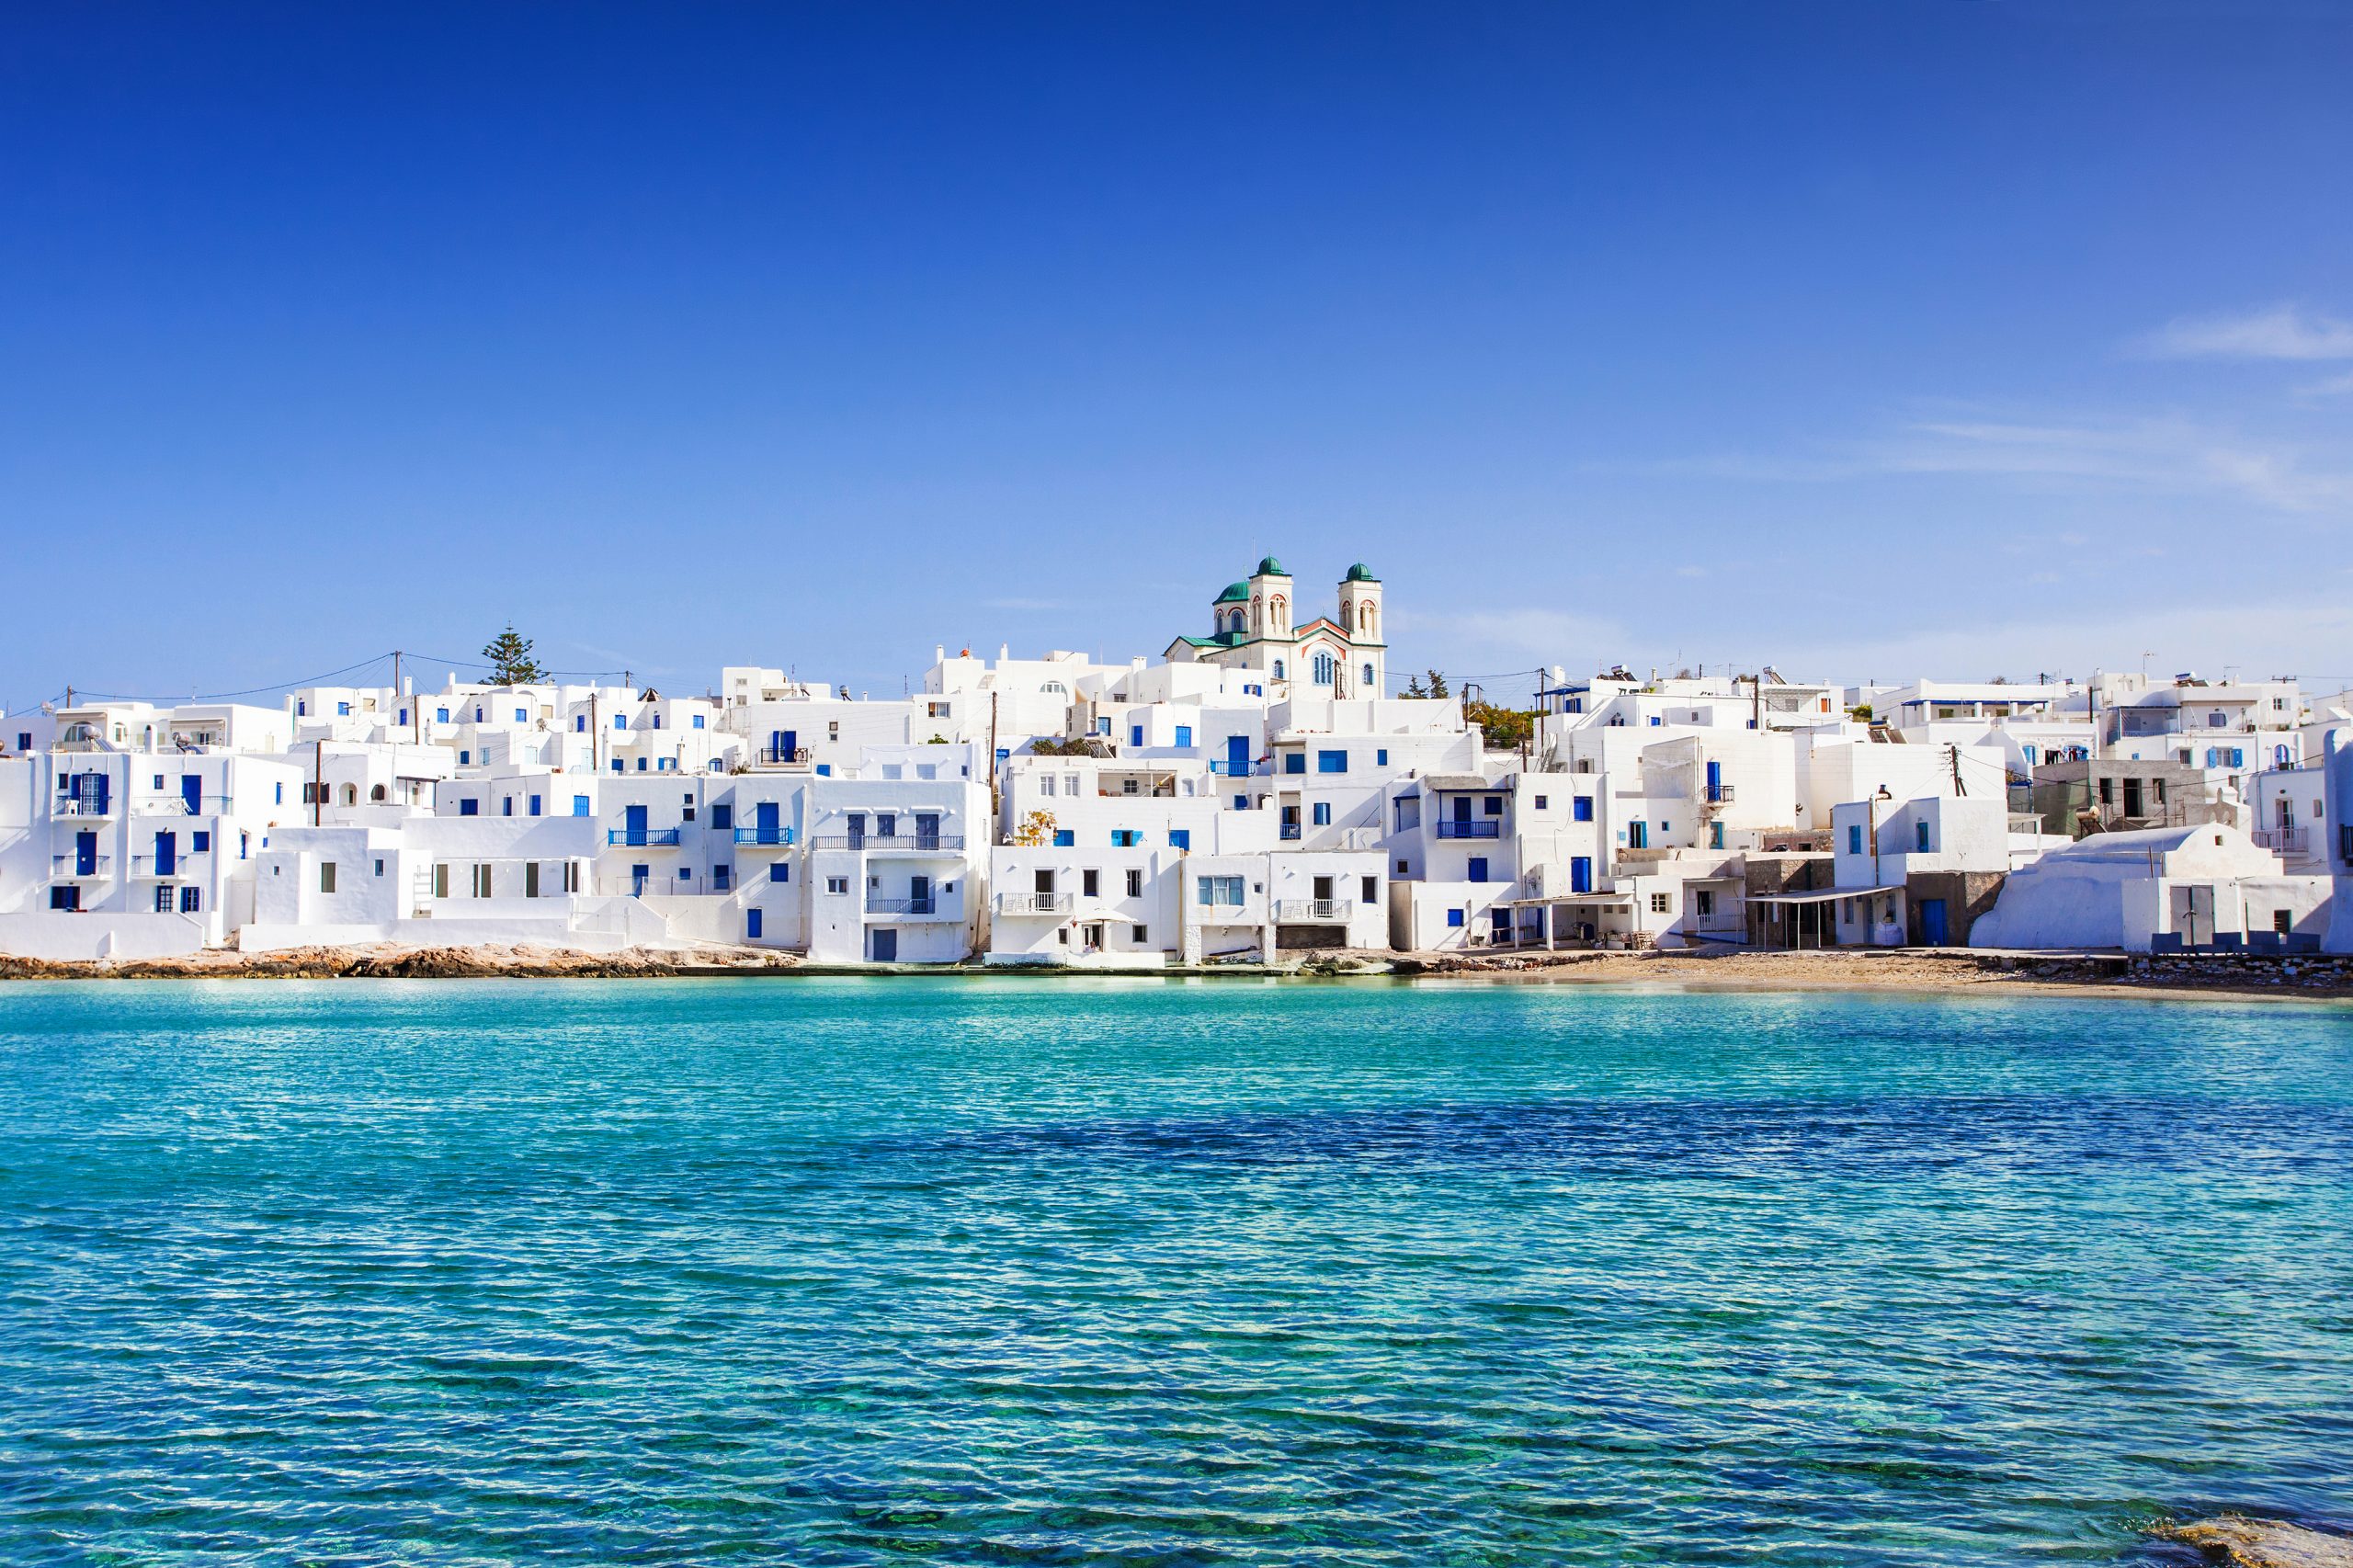 Paros is a mecca of water sports, according to US News